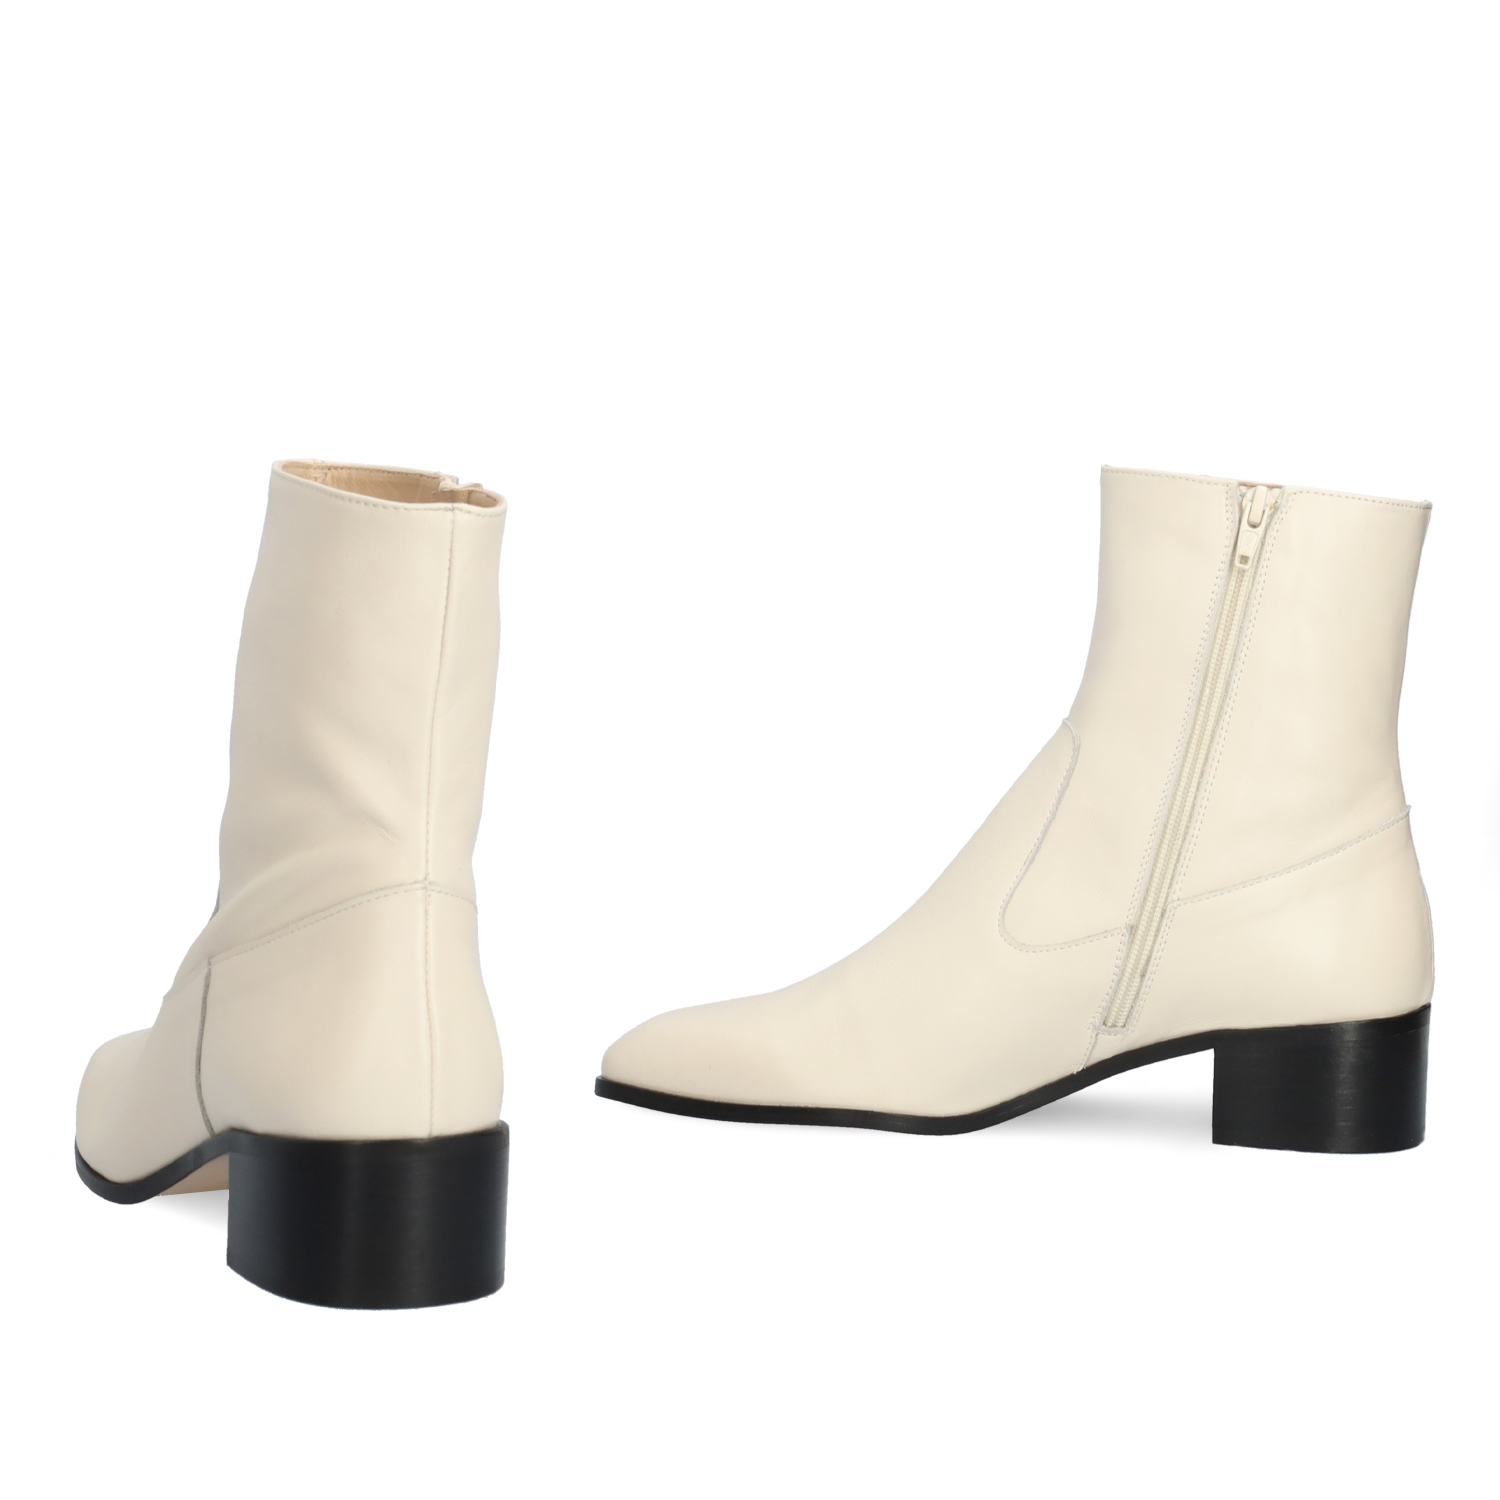 Heeled booties in off-white leather 